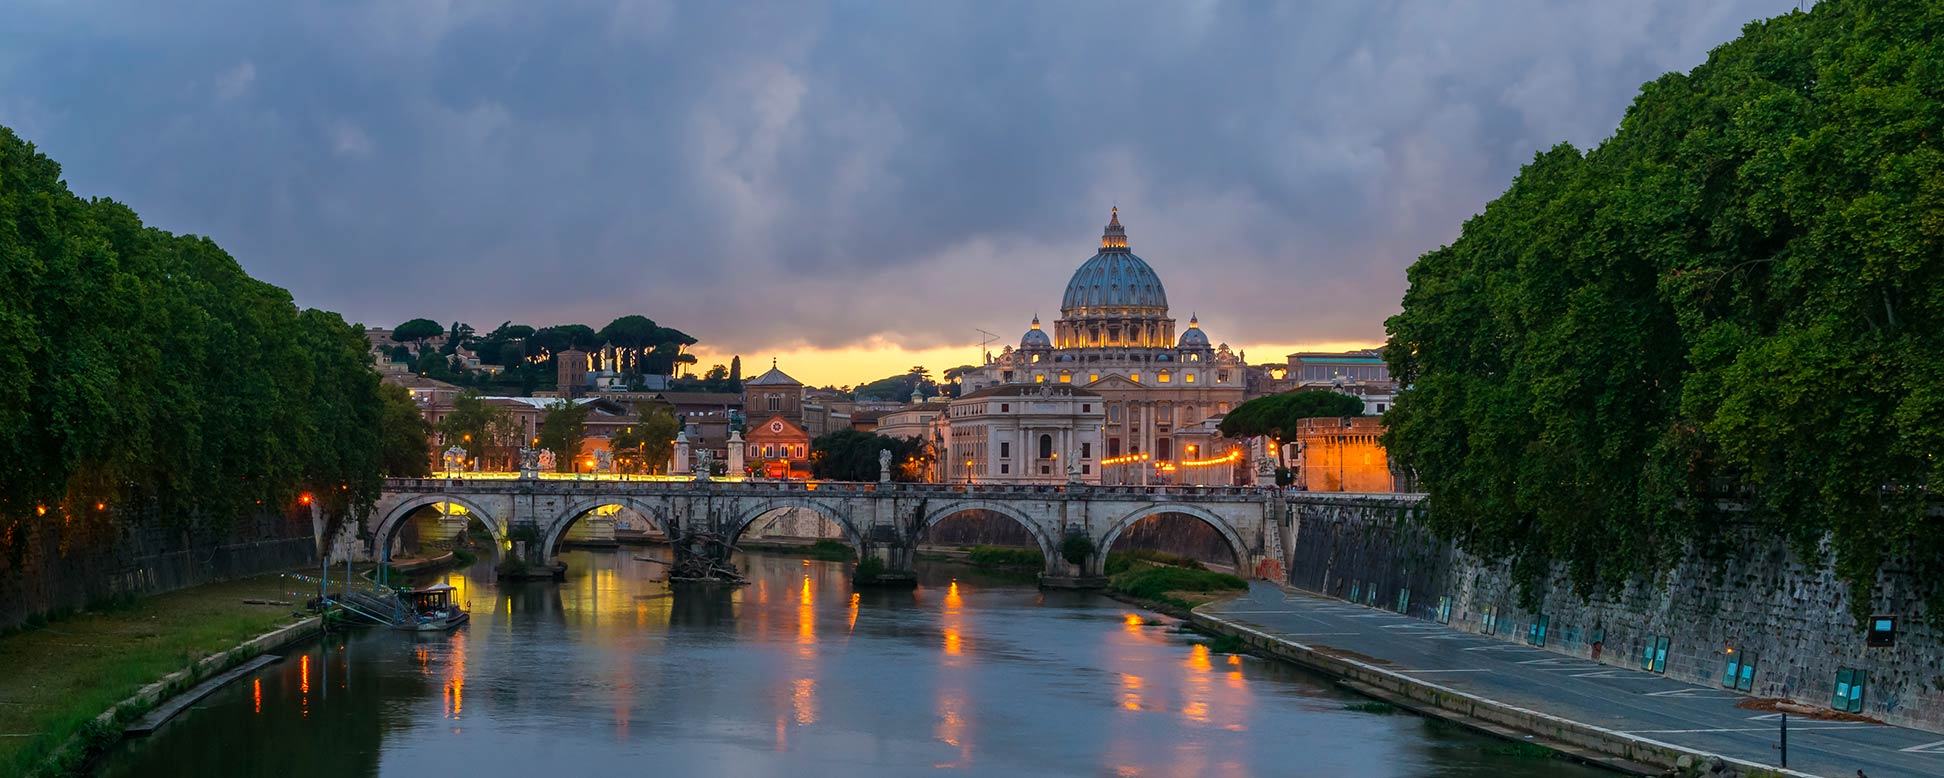 Rome at dusk with the Sant'Angelo bridge over the Tiber river and St. Peter's Basilica